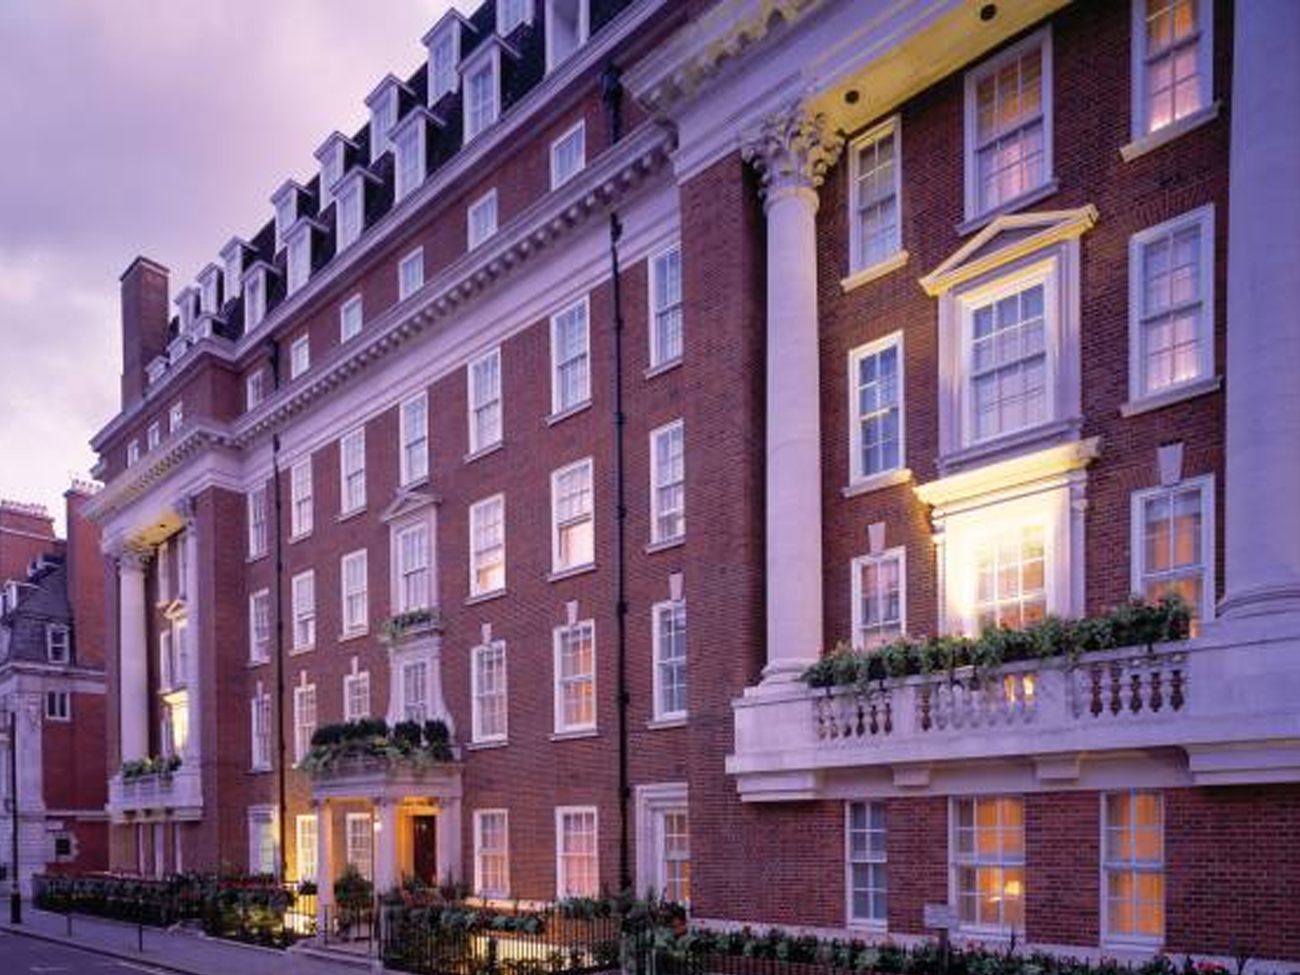 A splendid view of the 47 Park St Grand Residence by Marriott, a prestigious and luxurious accommodation option in London, showcasing its elegant facade and prime location in the city.